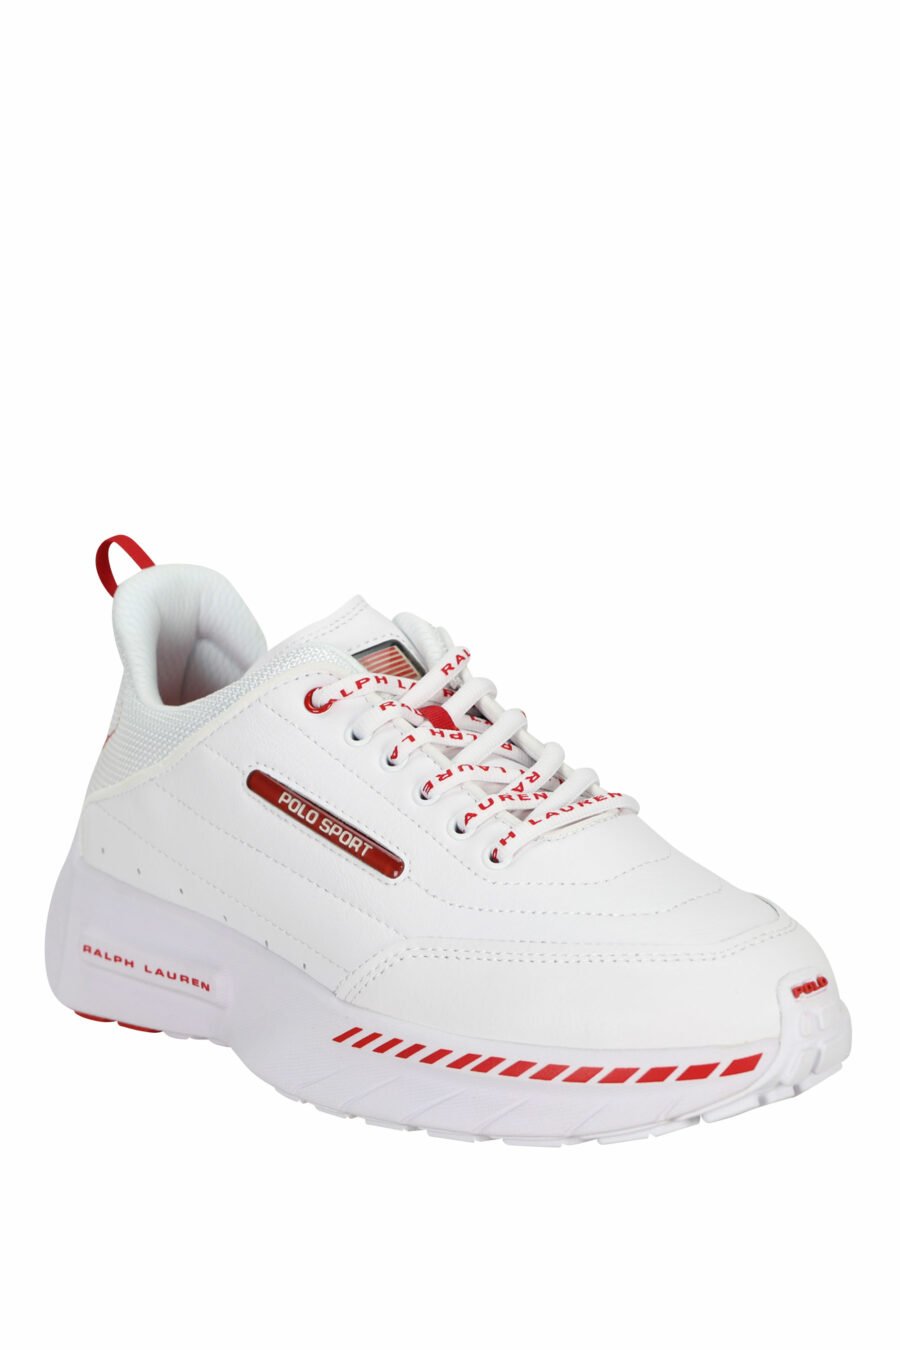 White trainers with mini-logo and red details - 3616535649279 1